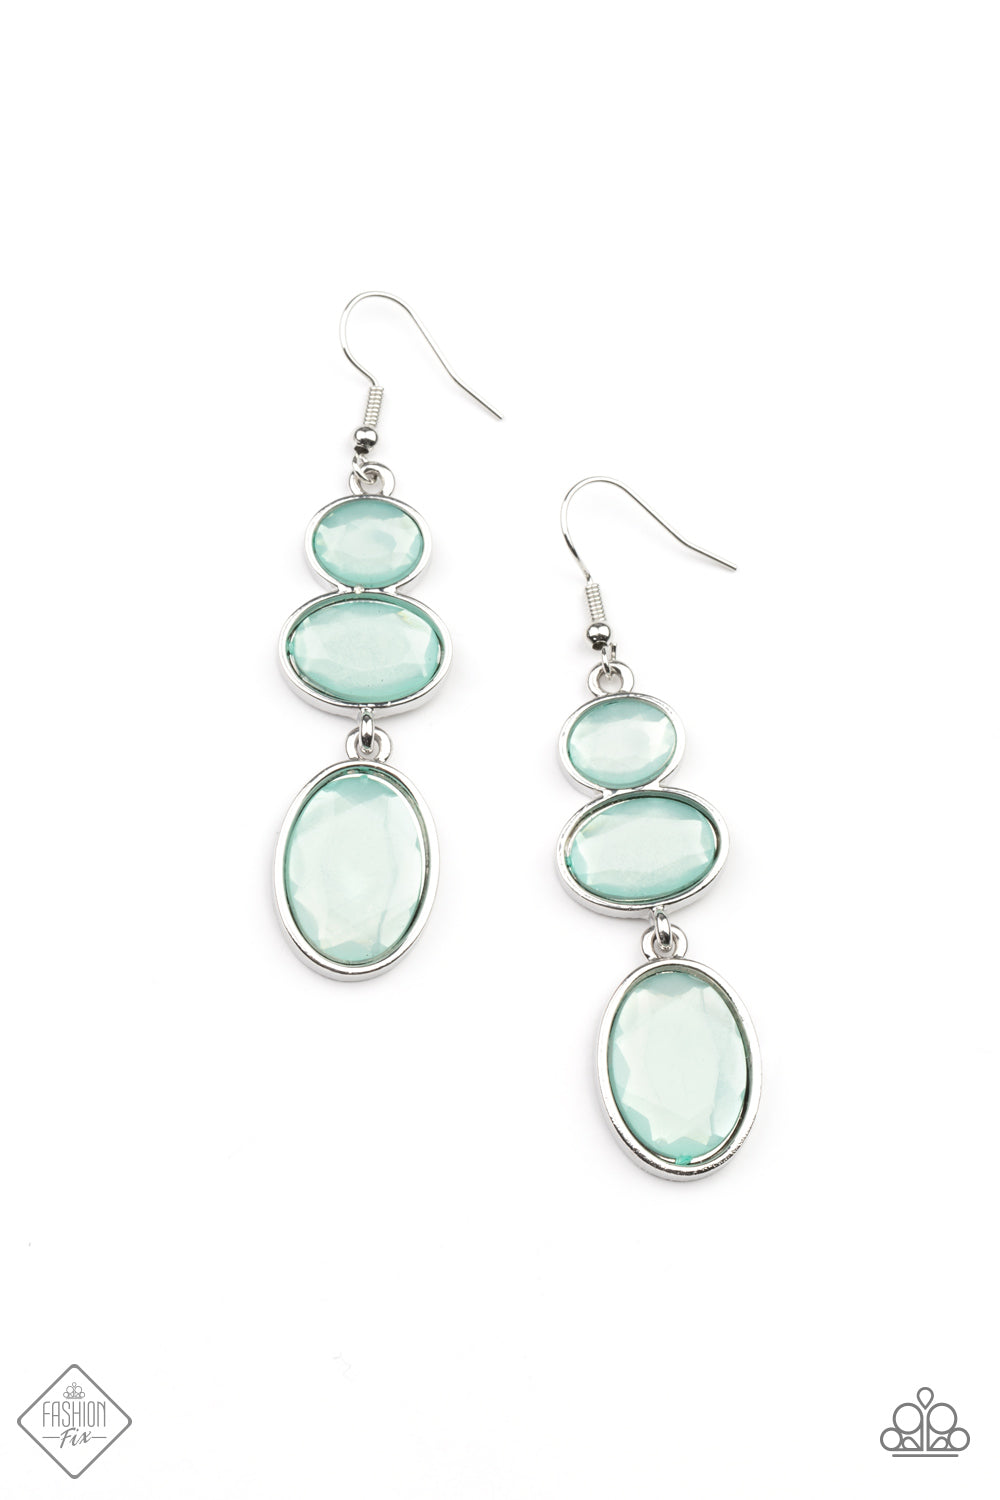 Paparazzi Tiers Of Tranquility - Blue Fashion Fix Earrings - A Finishing Touch Jewelry